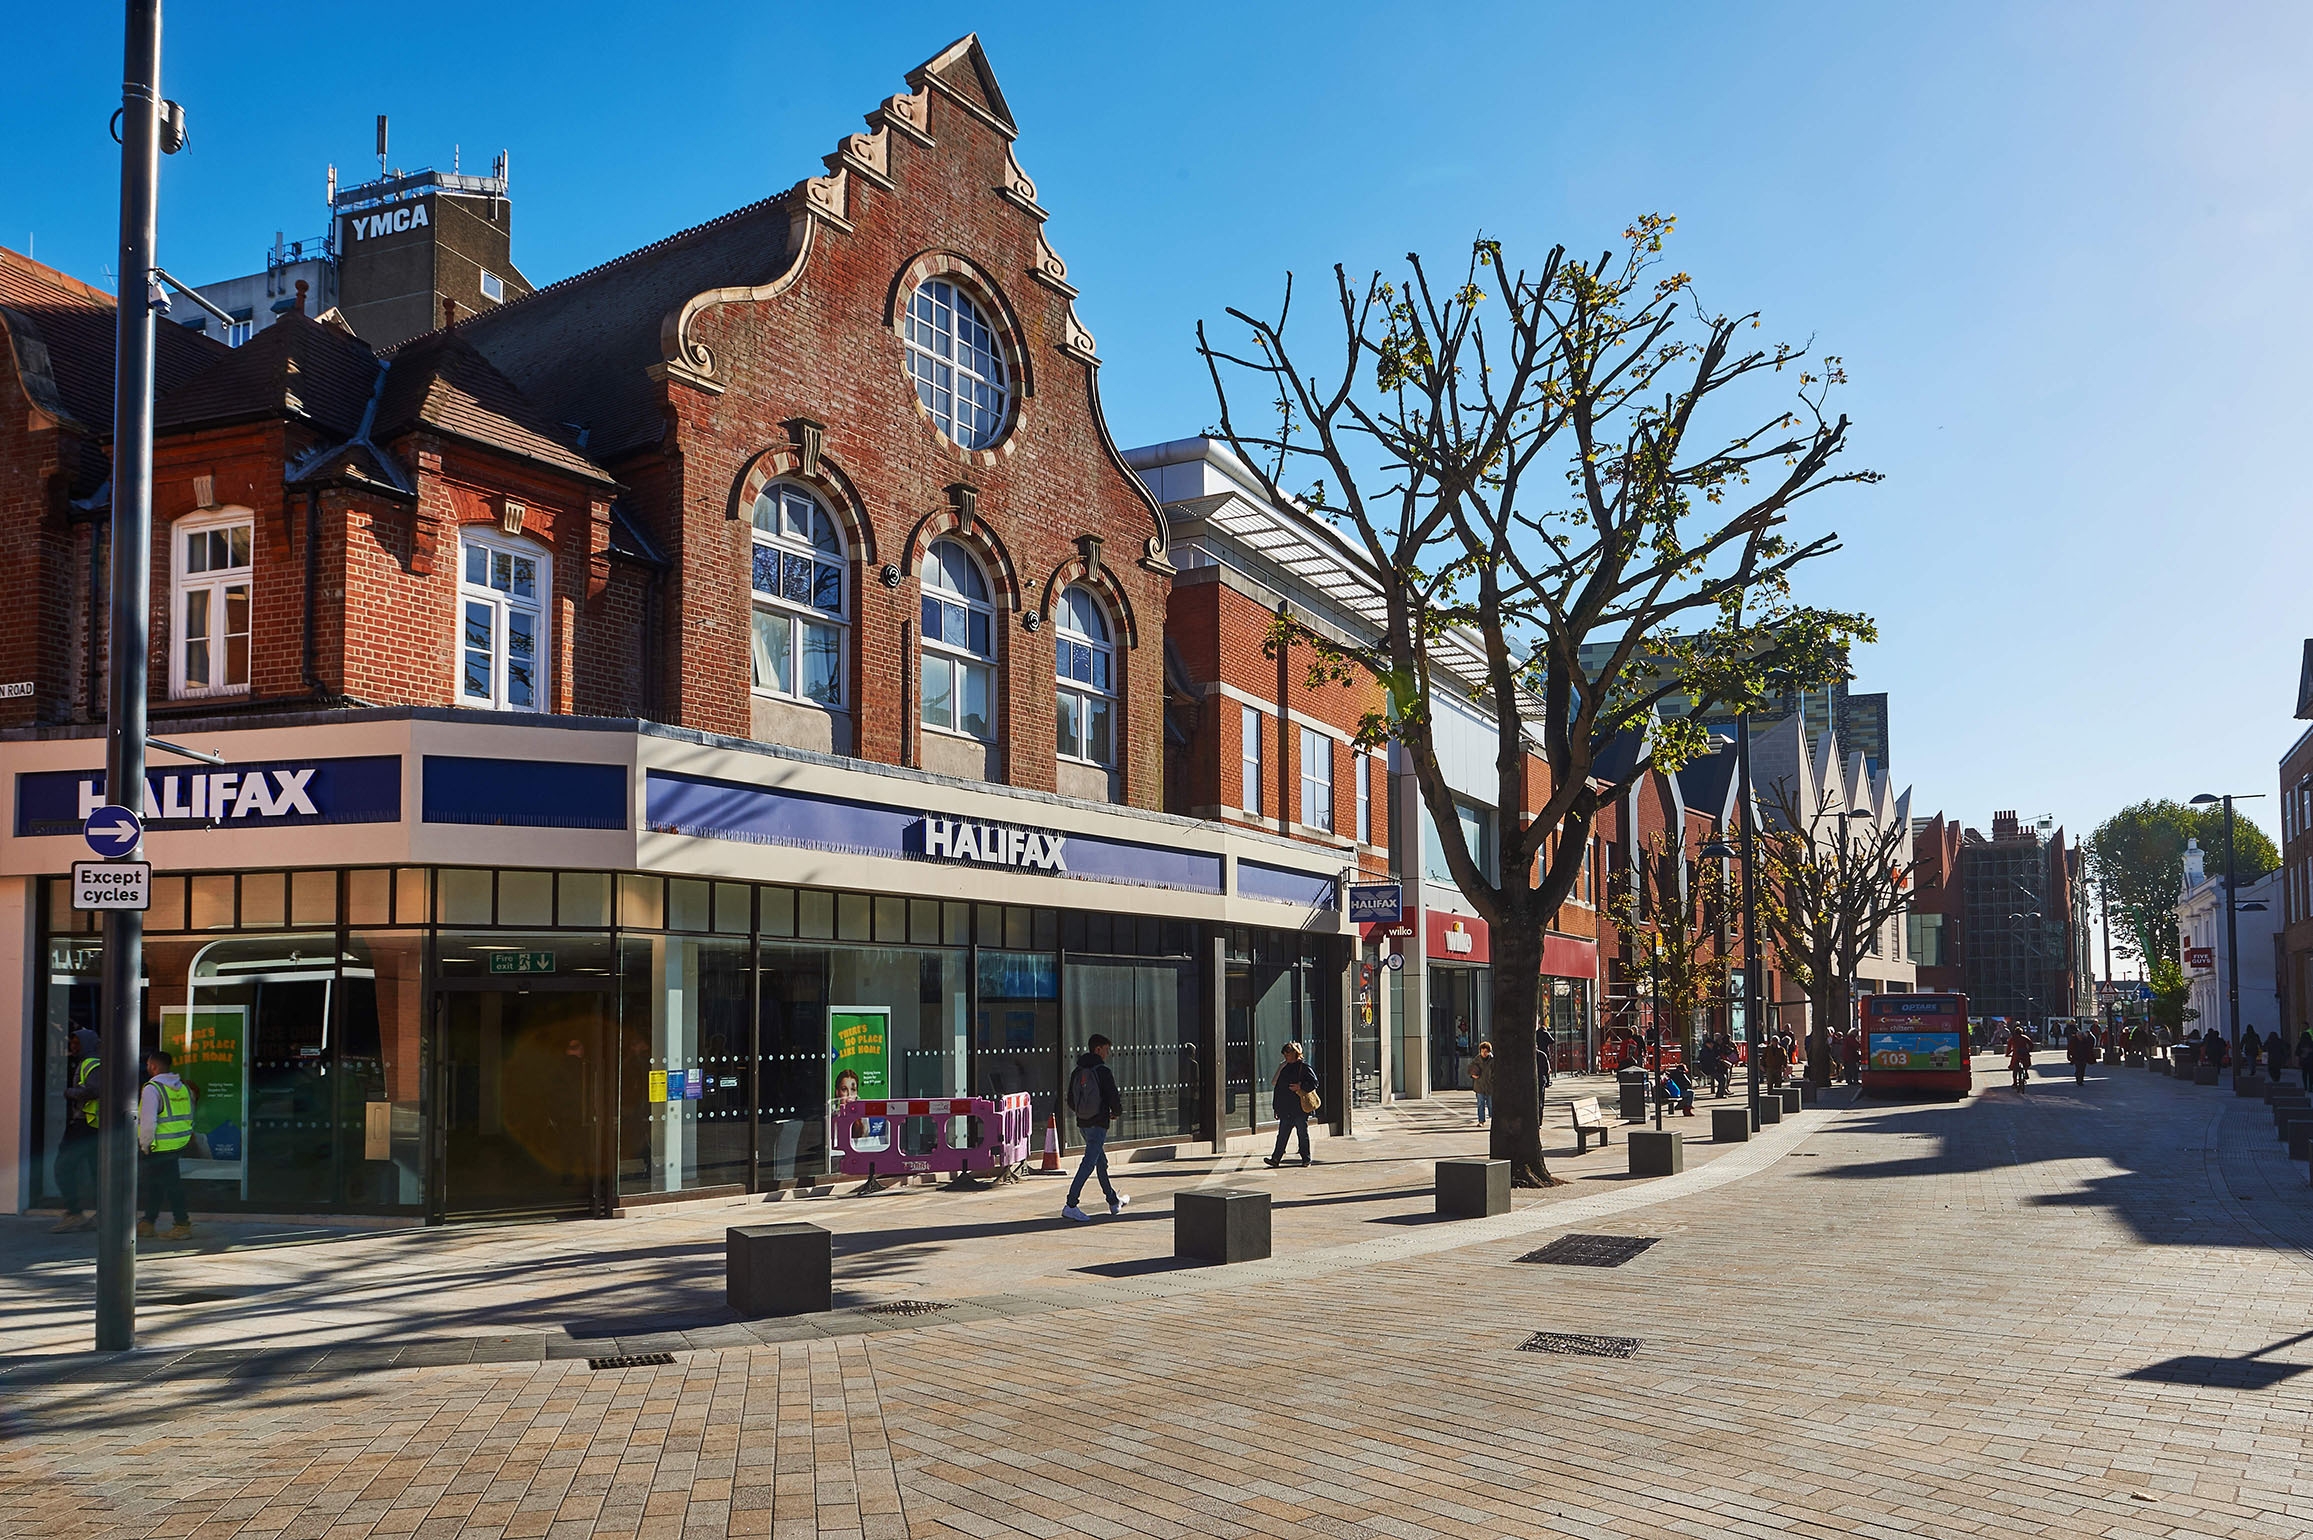 Watford High Street Transformation Project Shortlisted For Award